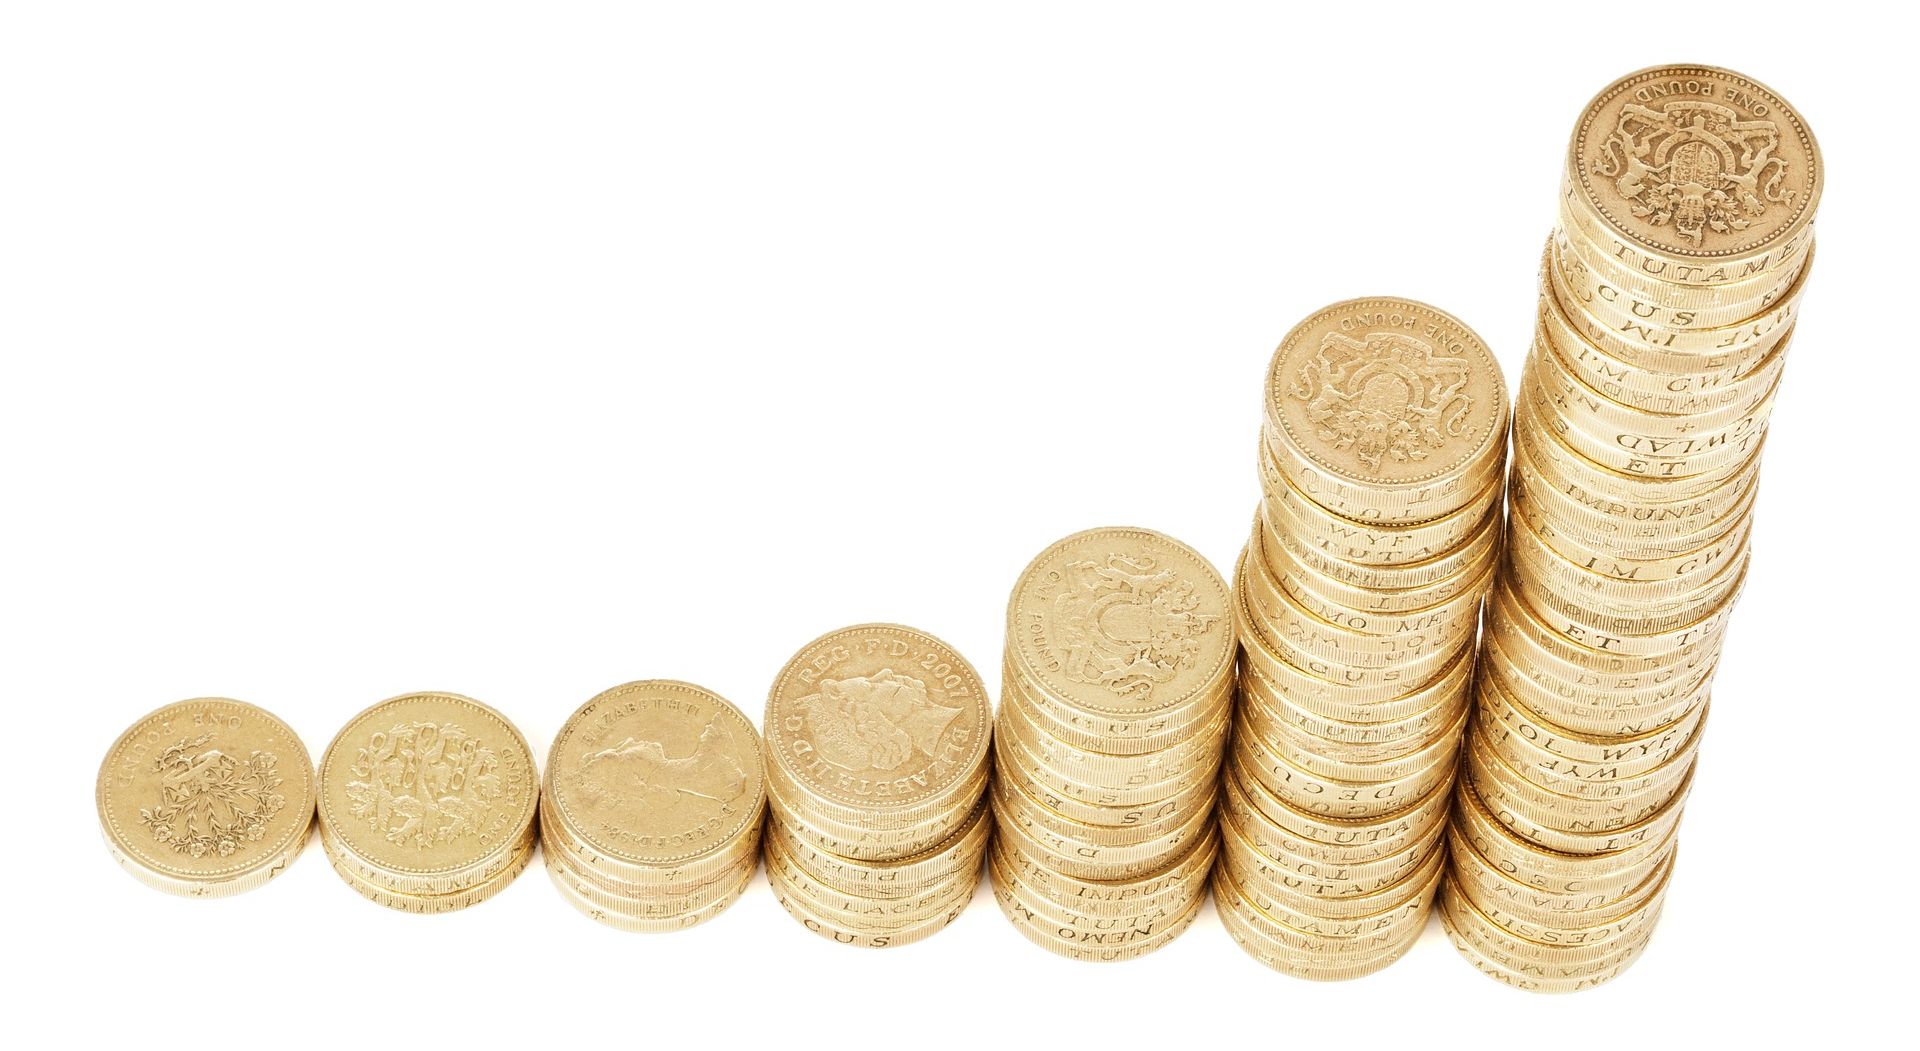 increasingly large stacks of pound coins